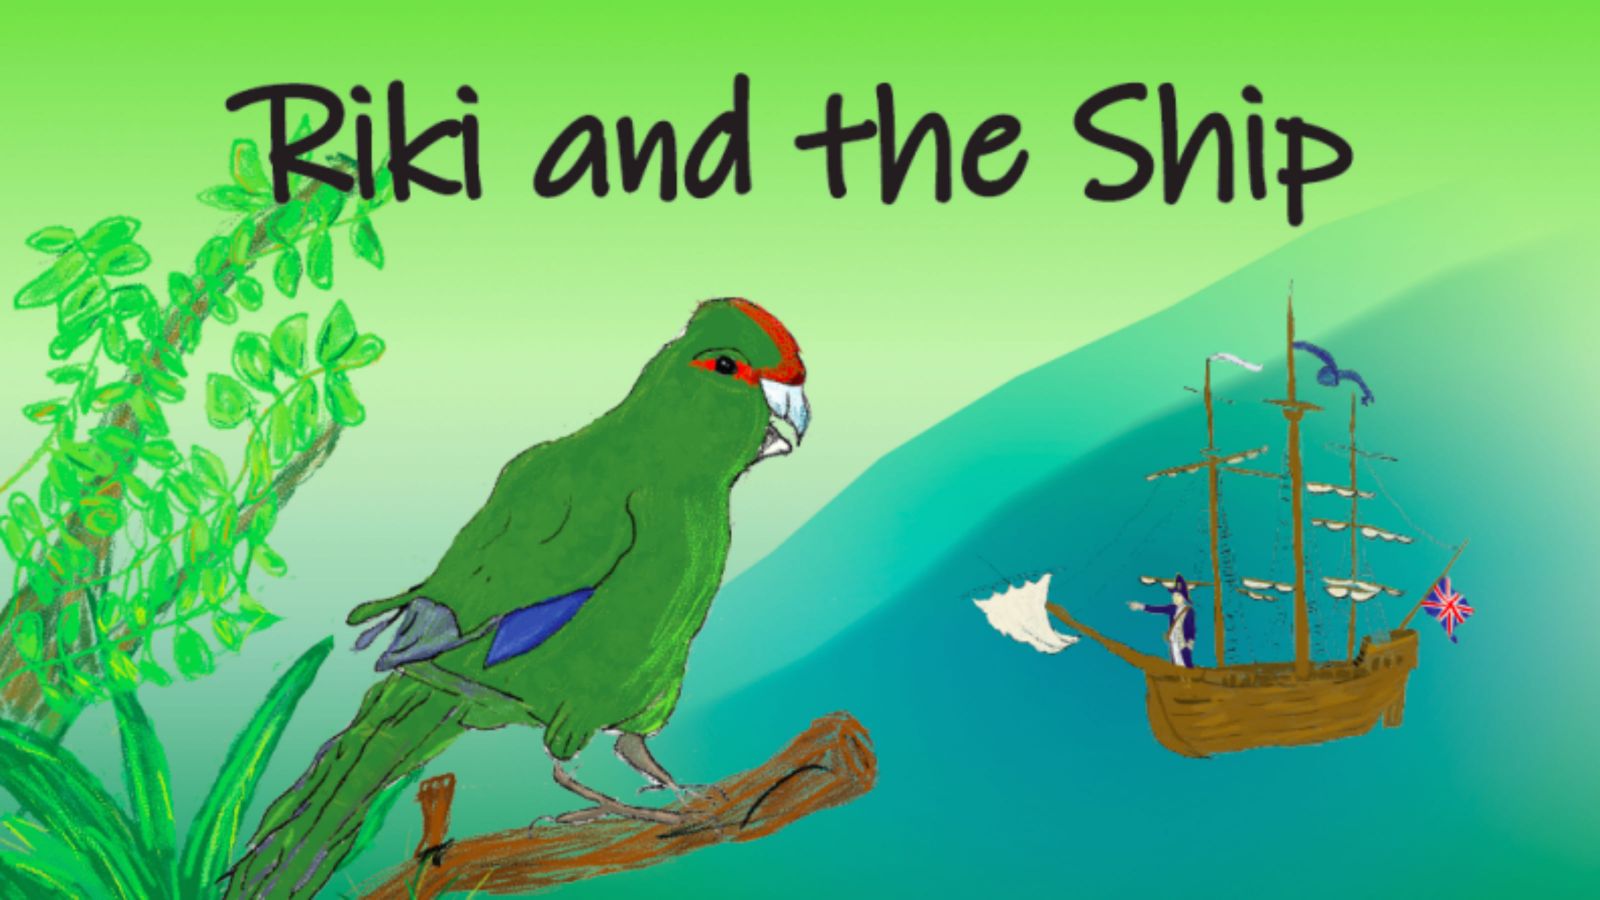 An animated picture of a green bird perched in a tree with a ship in the background – text on the image reads, Riki and the Ship.